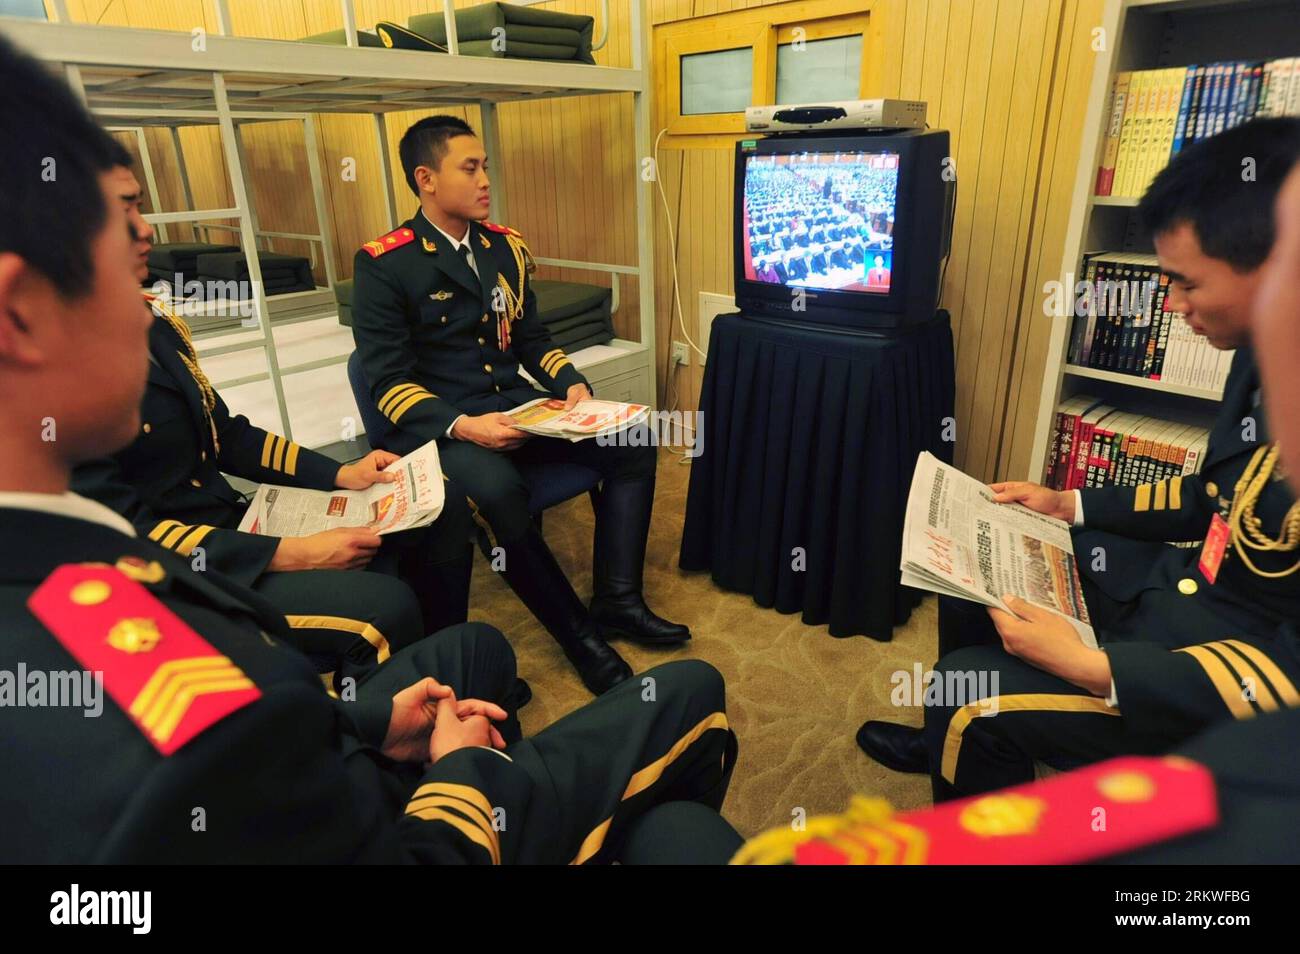 Bildnummer: 58678731  Datum: 08.11.2012  Copyright: imago/Xinhua (121108) -- BEIJING, Nov. 8, 2012 (Xinhua) -- Soldiers of armed police watch live TV report on the opening ceremony of the 18th National Congress of the Communist Party of China (CPC) in Beijing, capital of China, Nov. 8, 2012. The 18th CPC National Congress was opened in Beijing on Thursday. (Xinhua/Liu Changlong) (hdt) (CPC CONGRESS) CHINA-18TH CPC NATIONAL CONGRESS (CN) PUBLICATIONxNOTxINxCHN Politik Parteitag xas x0x 2012 quer      58678731 Date 08 11 2012 Copyright Imago XINHUA  Beijing Nov 8 2012 XINHUA Soldiers of Armed Po Stock Photo